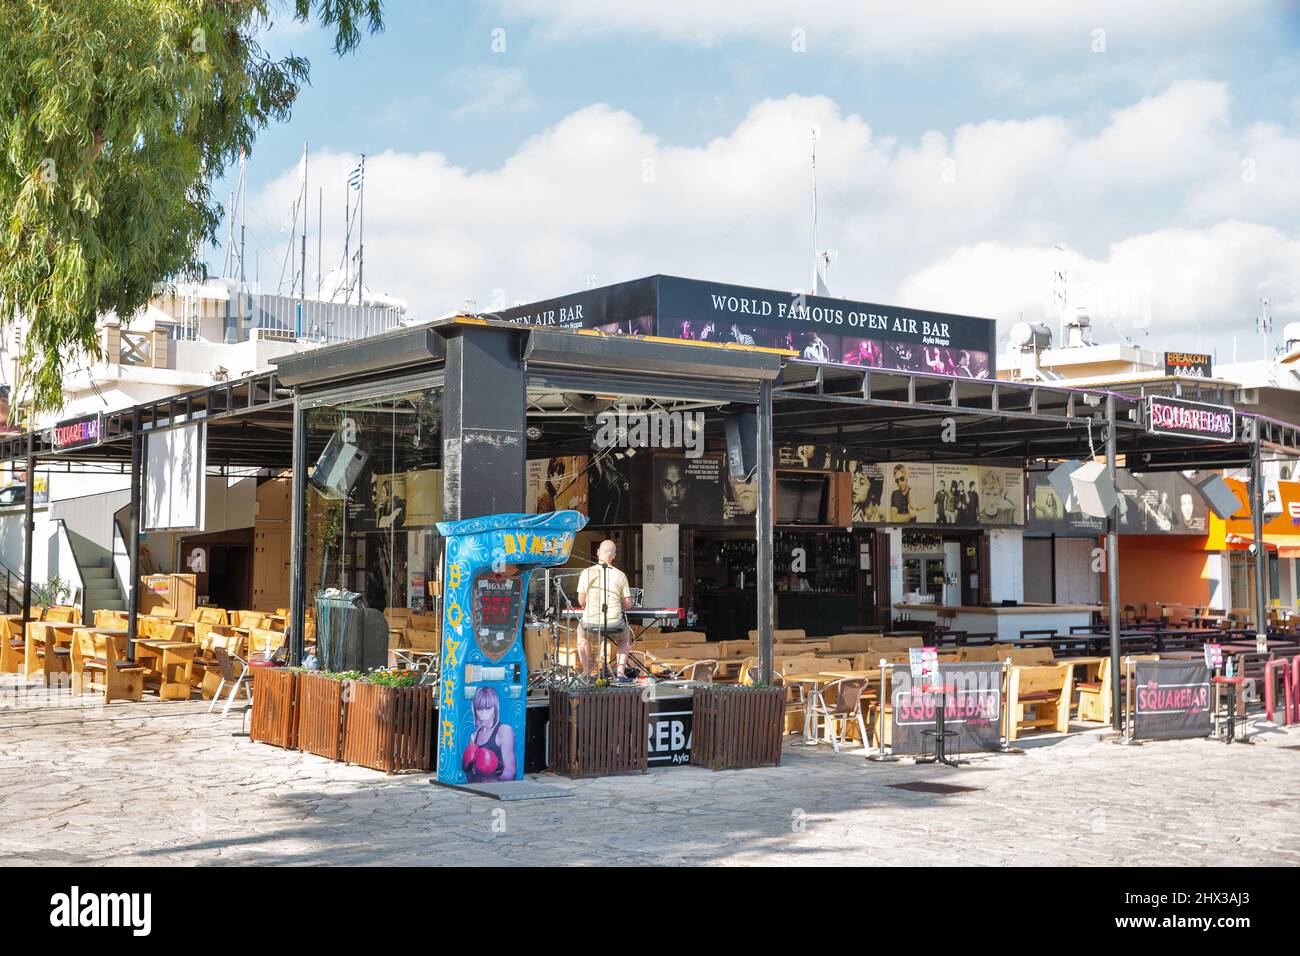 Ayia Napa, Cyprus - May 28, 2021: Square Bar music open air building. Ayia Napa is a tourist resort at the eastern end of the southern coast of Cyprus Stock Photo